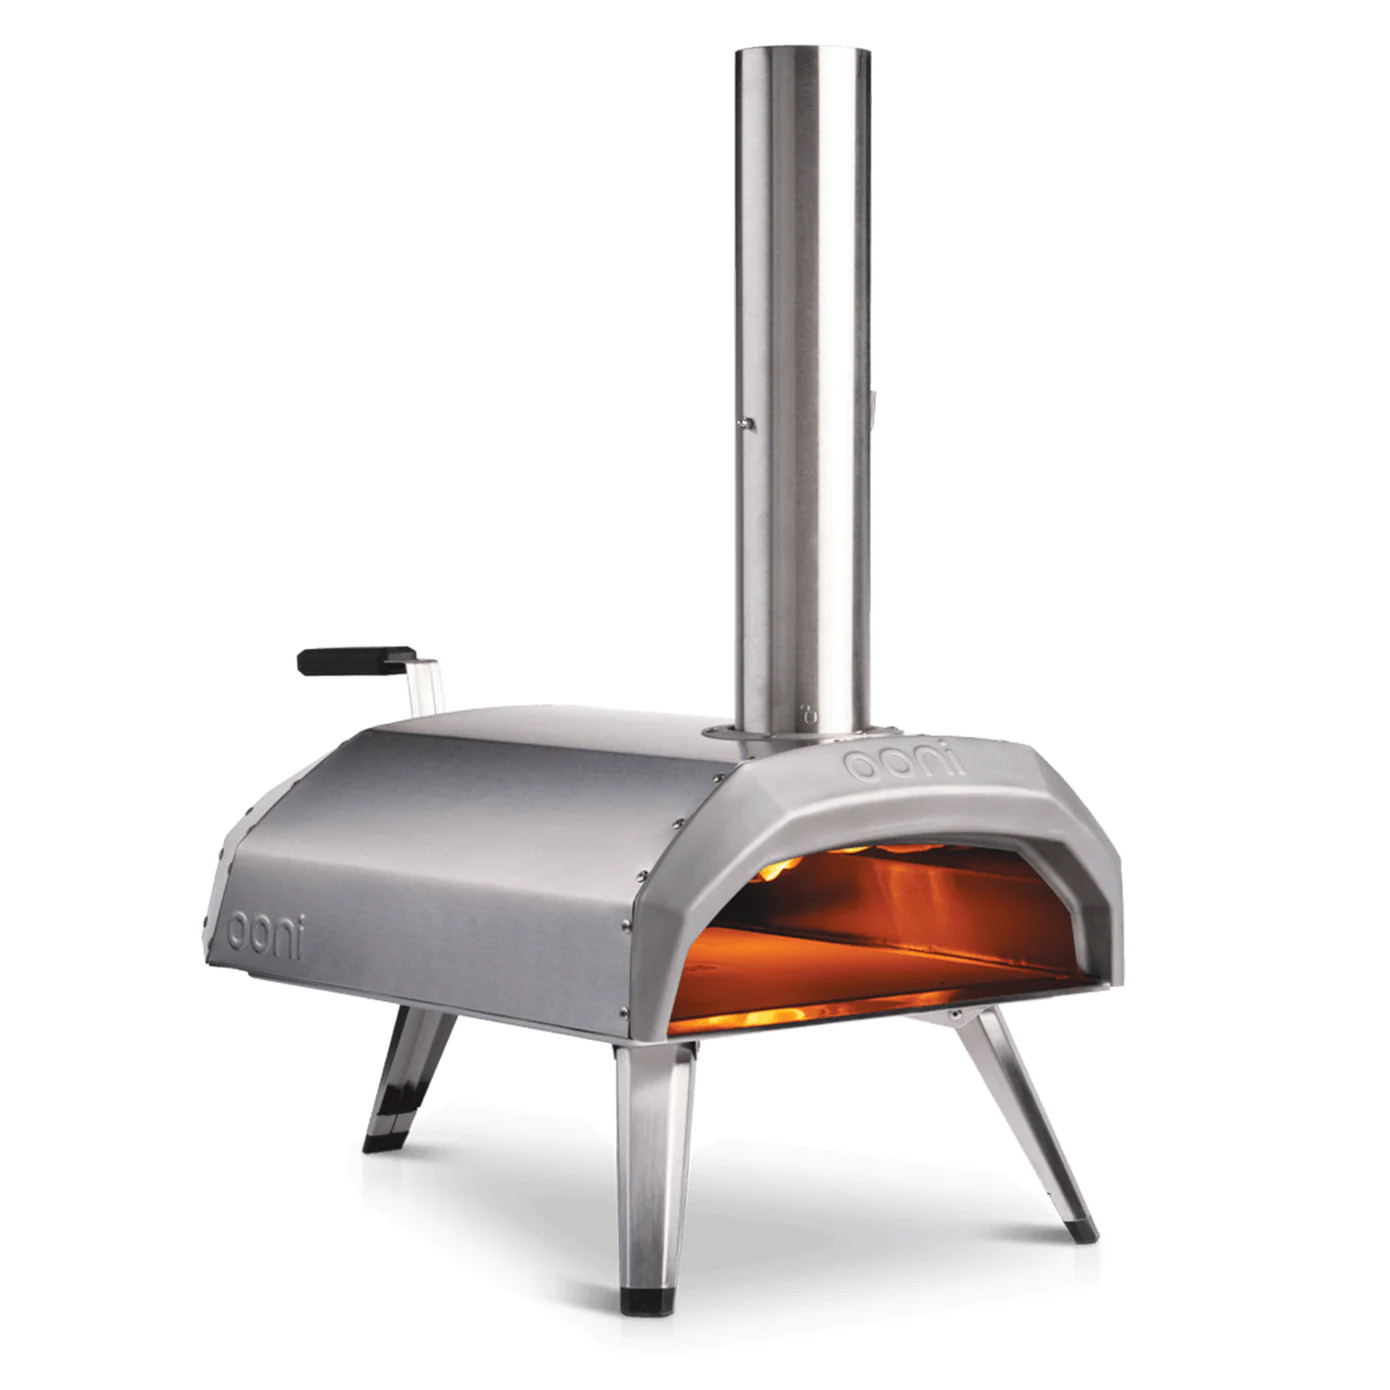 Ooni Karu 12 Multi-fuel Pizza Oven with portable legs